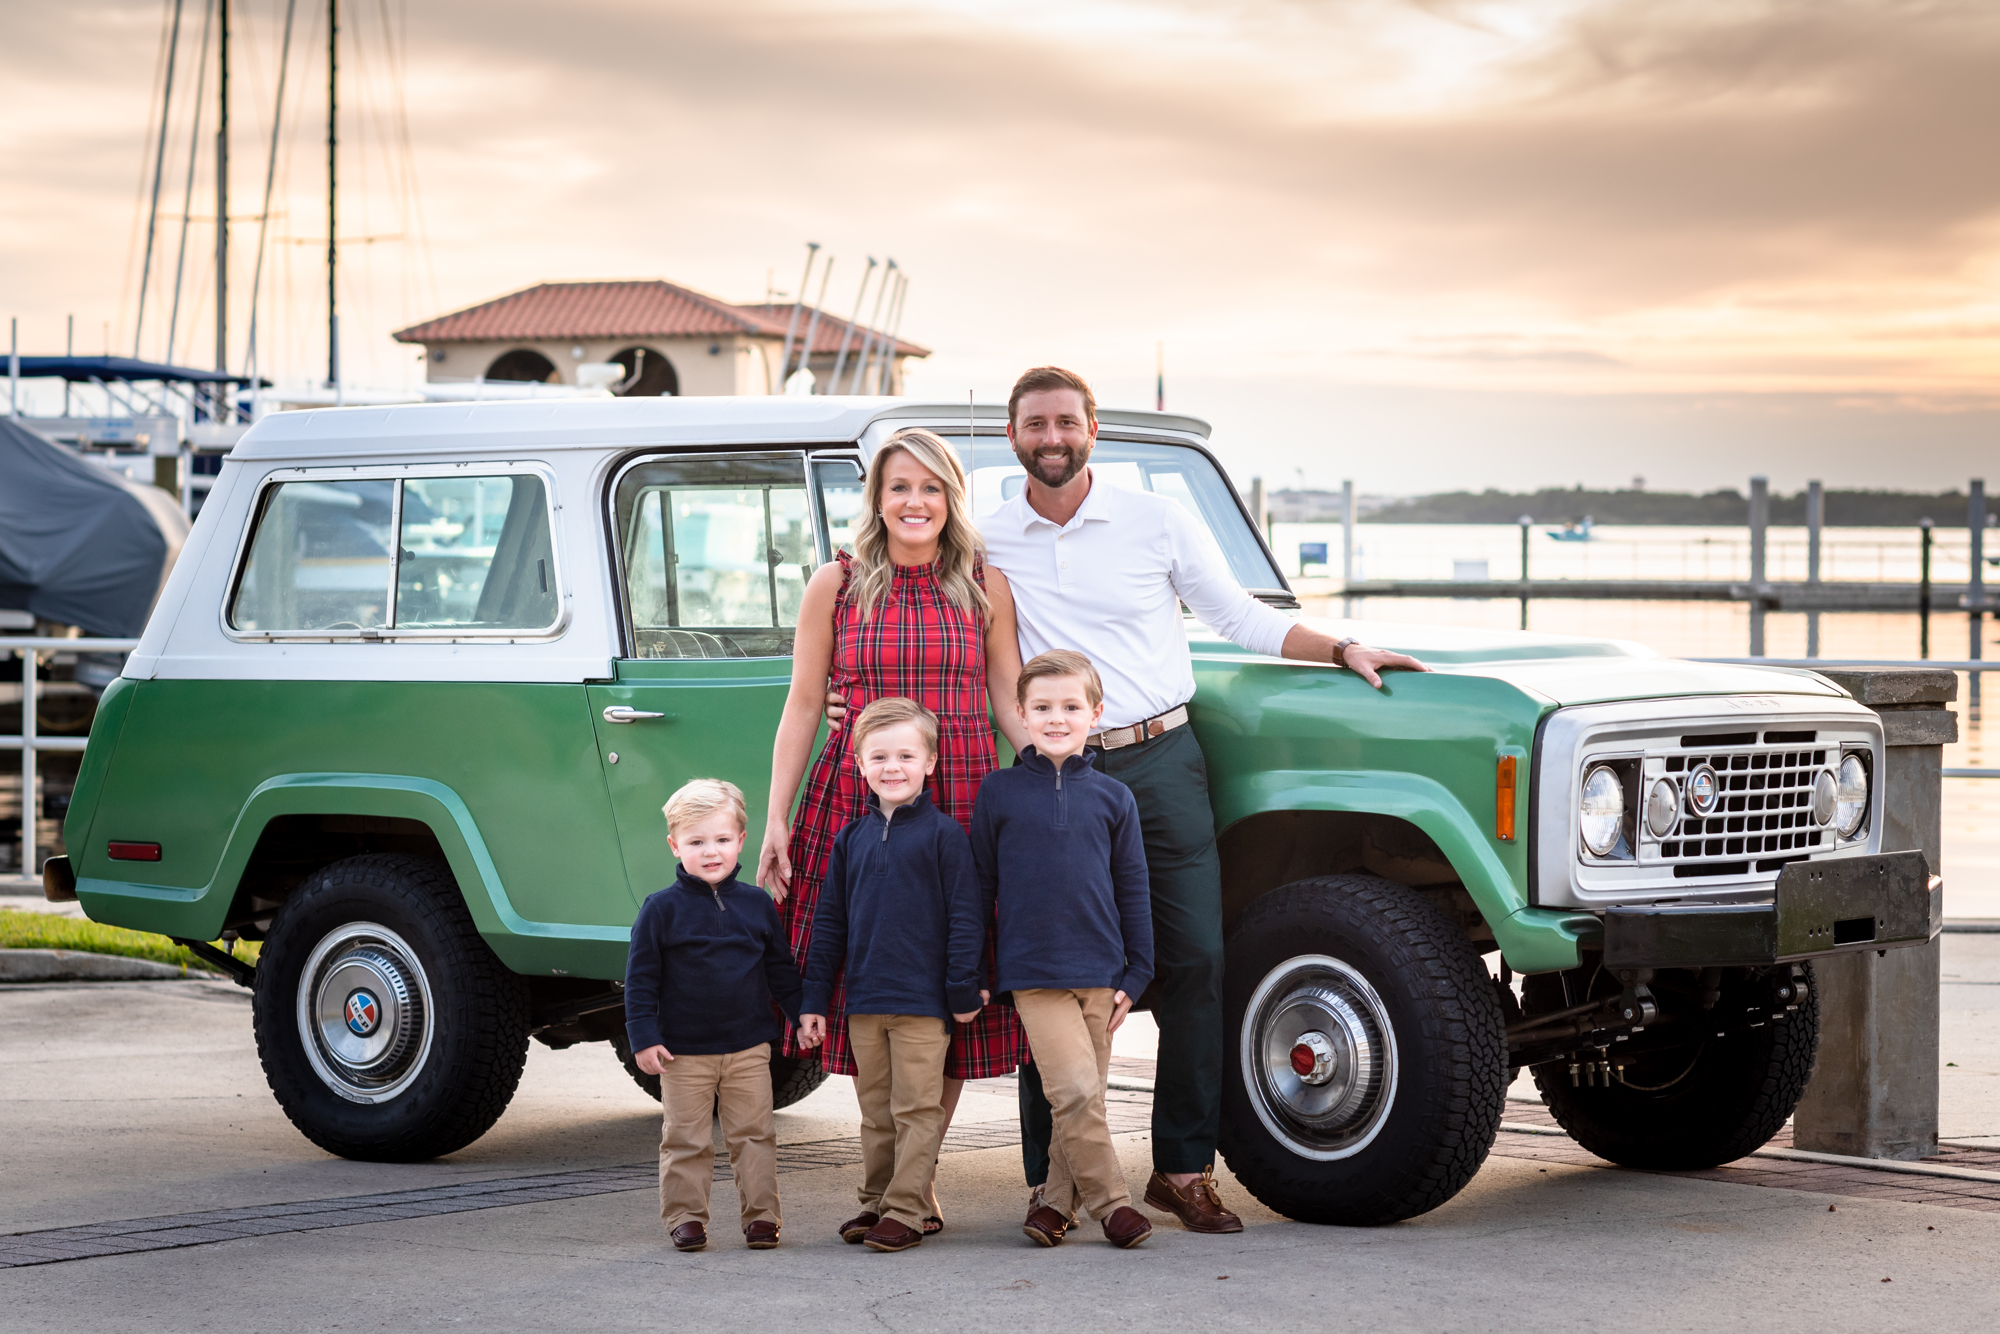 Kerrie and Daniel Hileman with children Andrew, 2, Peyton, 5, and Patrick, 7. The couple, who own The White Magnolia Bridal Collection, plan to launch Fore Score Golf Tavern.